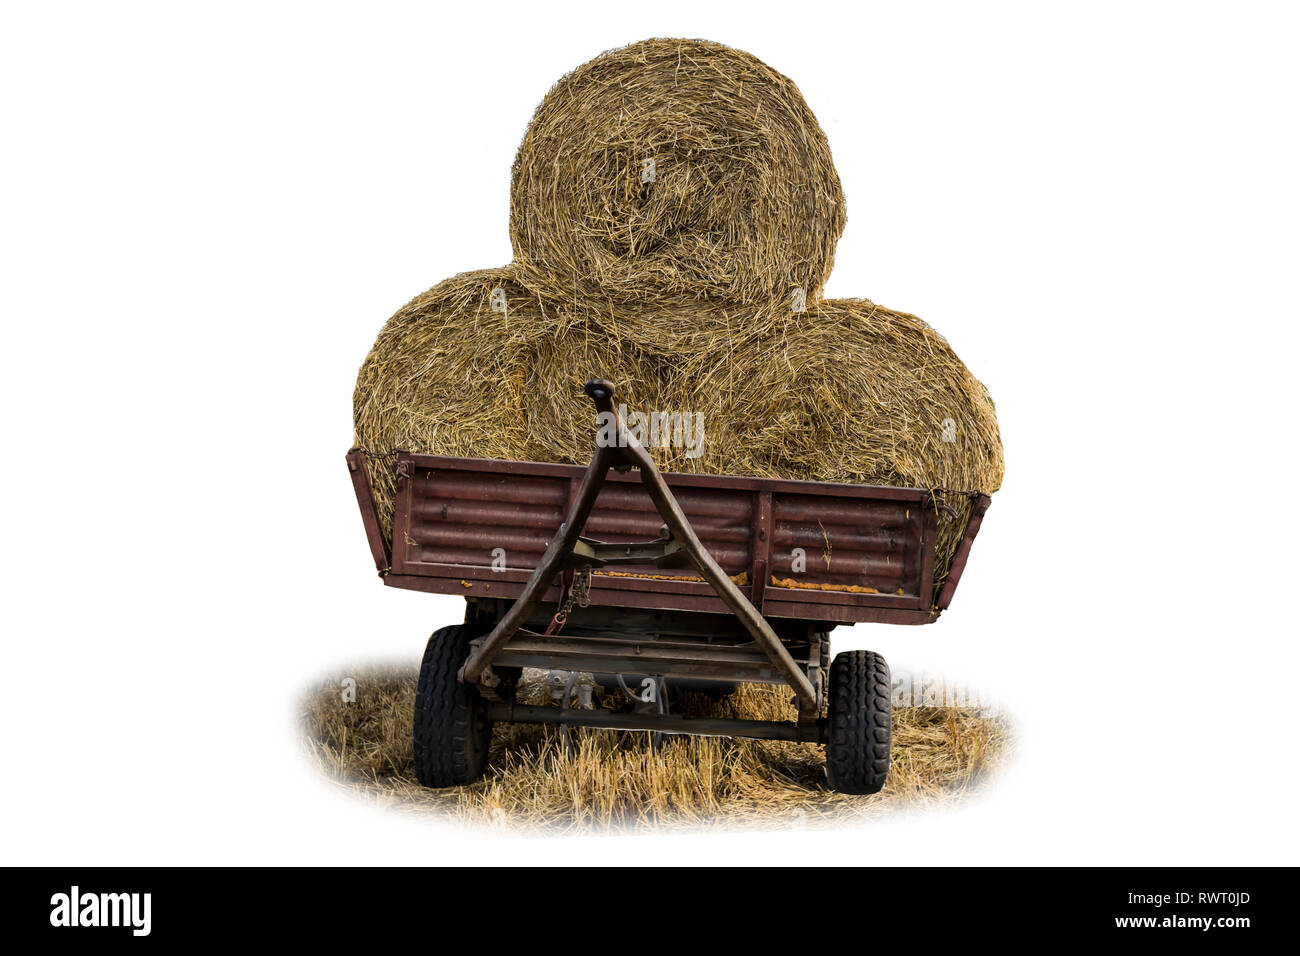 Round bales of straw, covered with a net, loaded on a tractor trailer.Straw is a widely used  material for livestock bedding on a farm.Isolated photo. Stock Photo